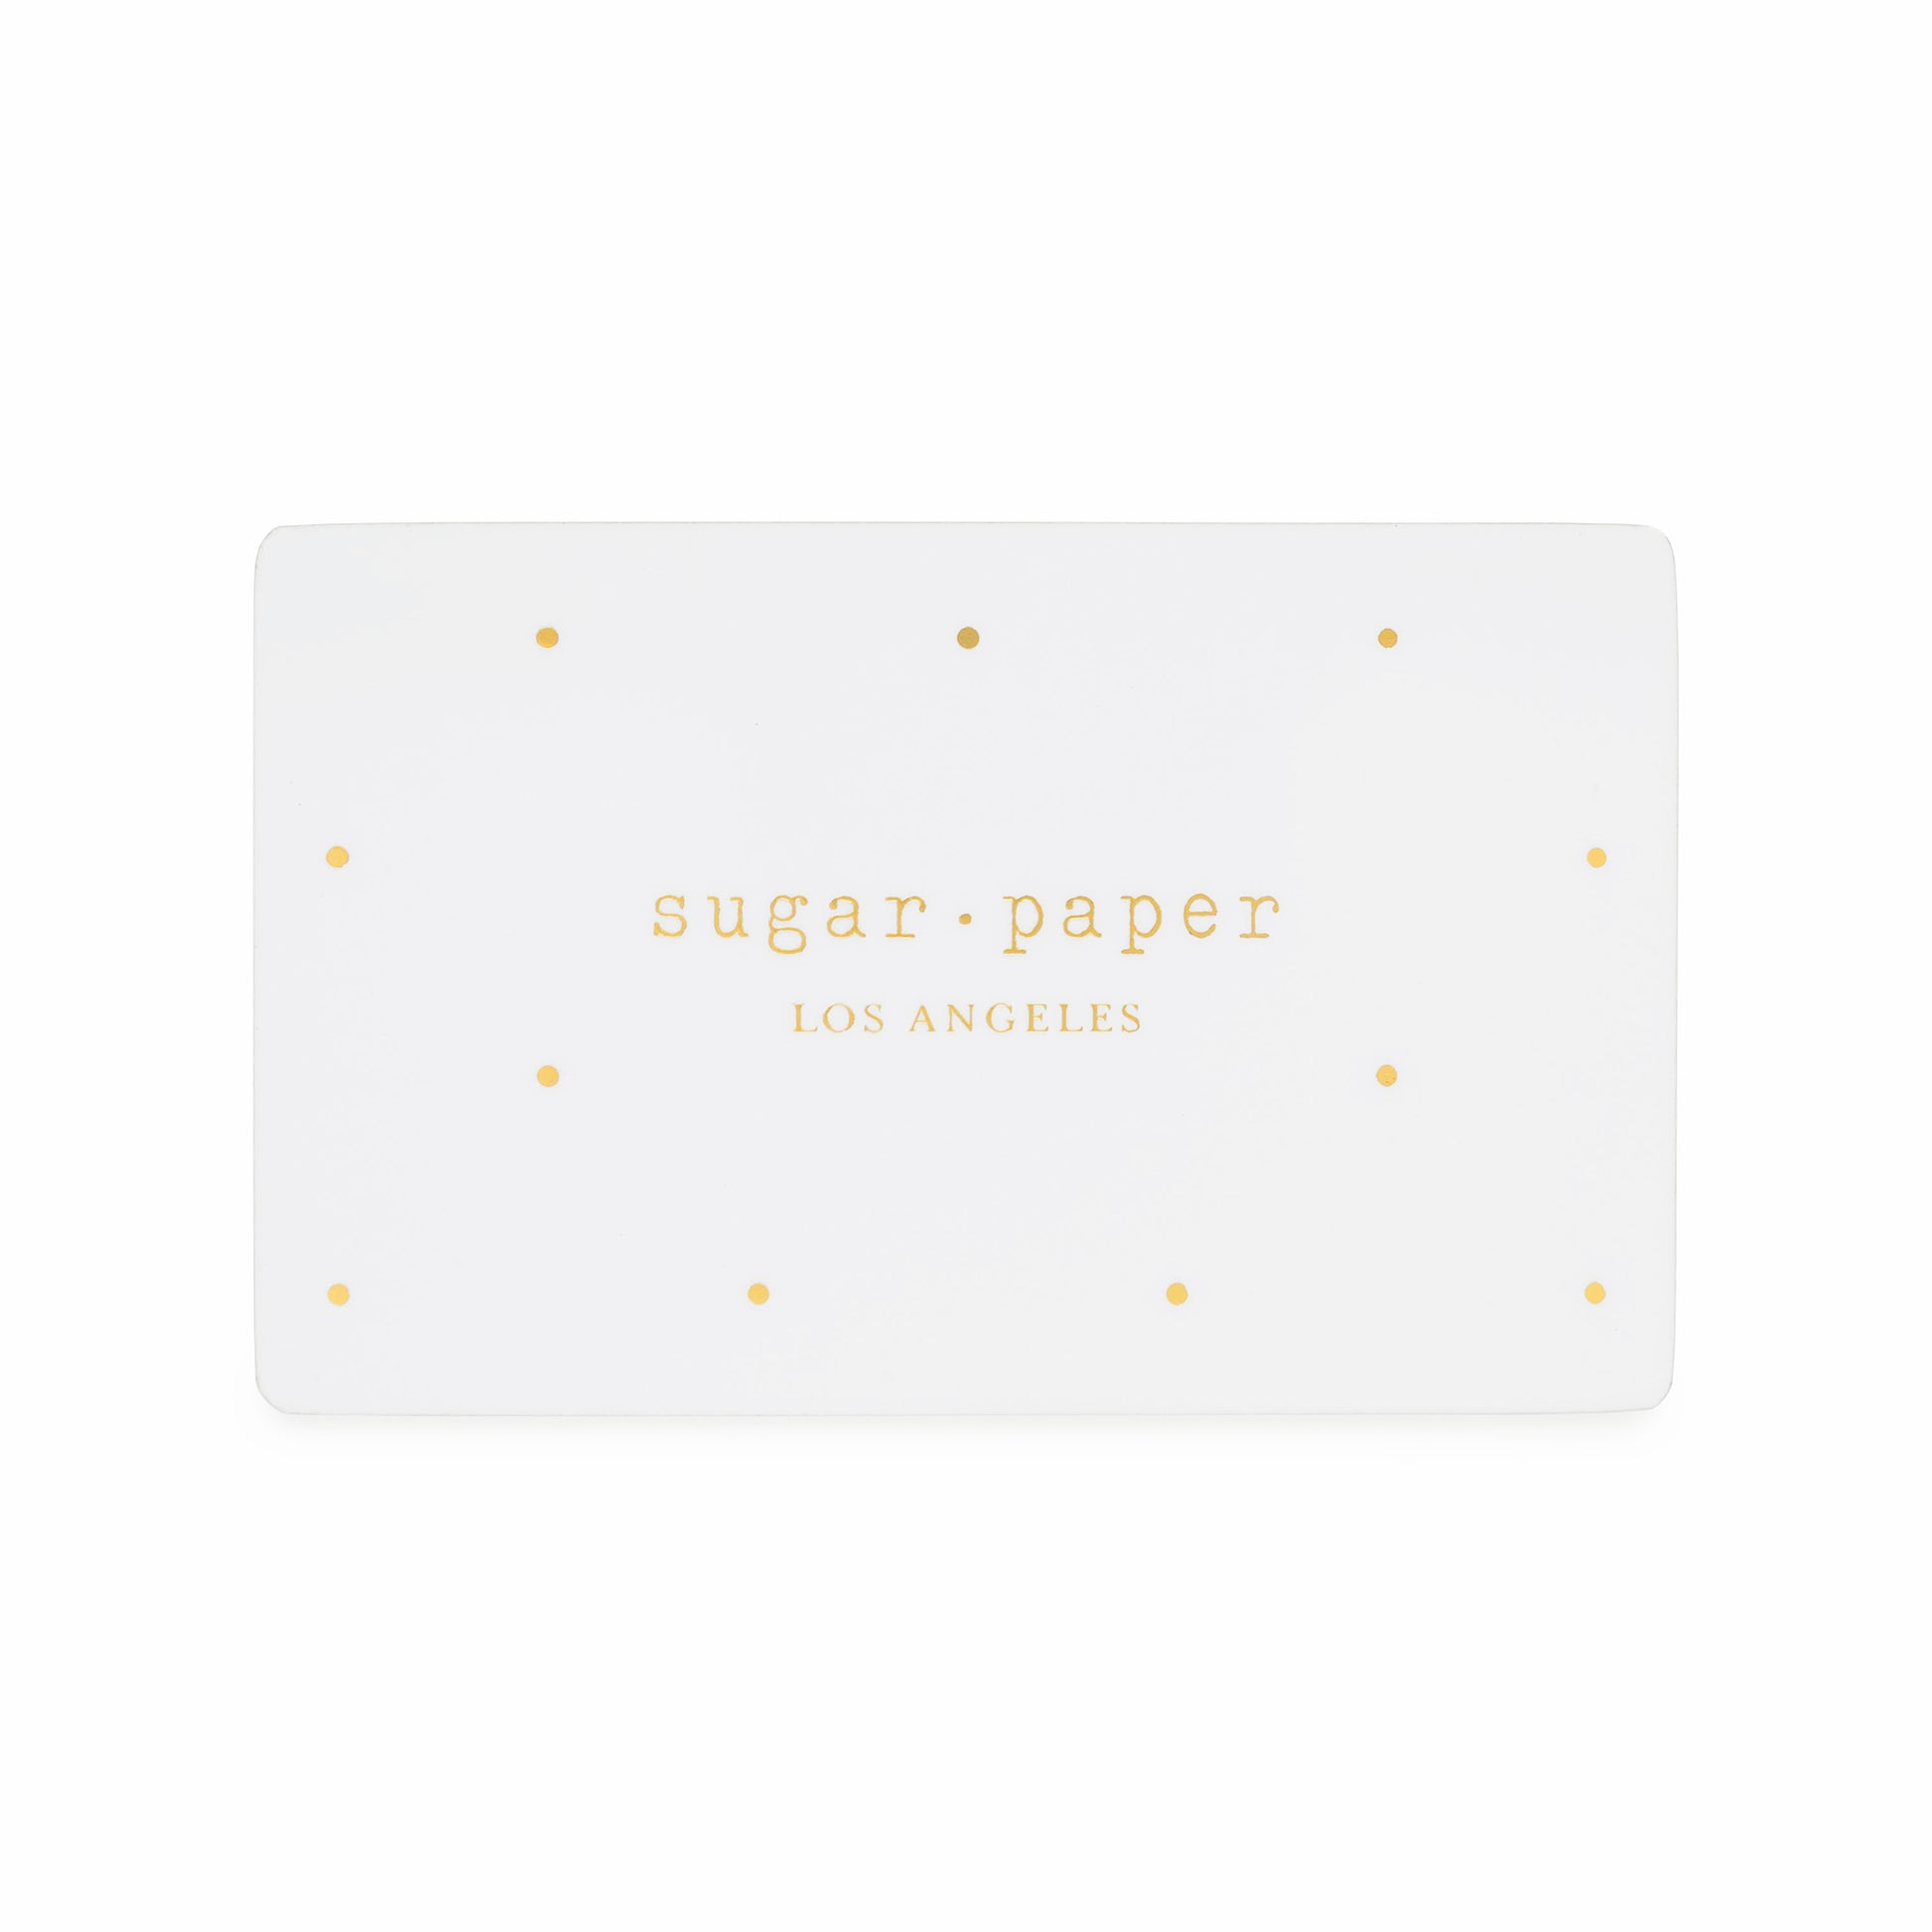 White with gold polka dots gift card